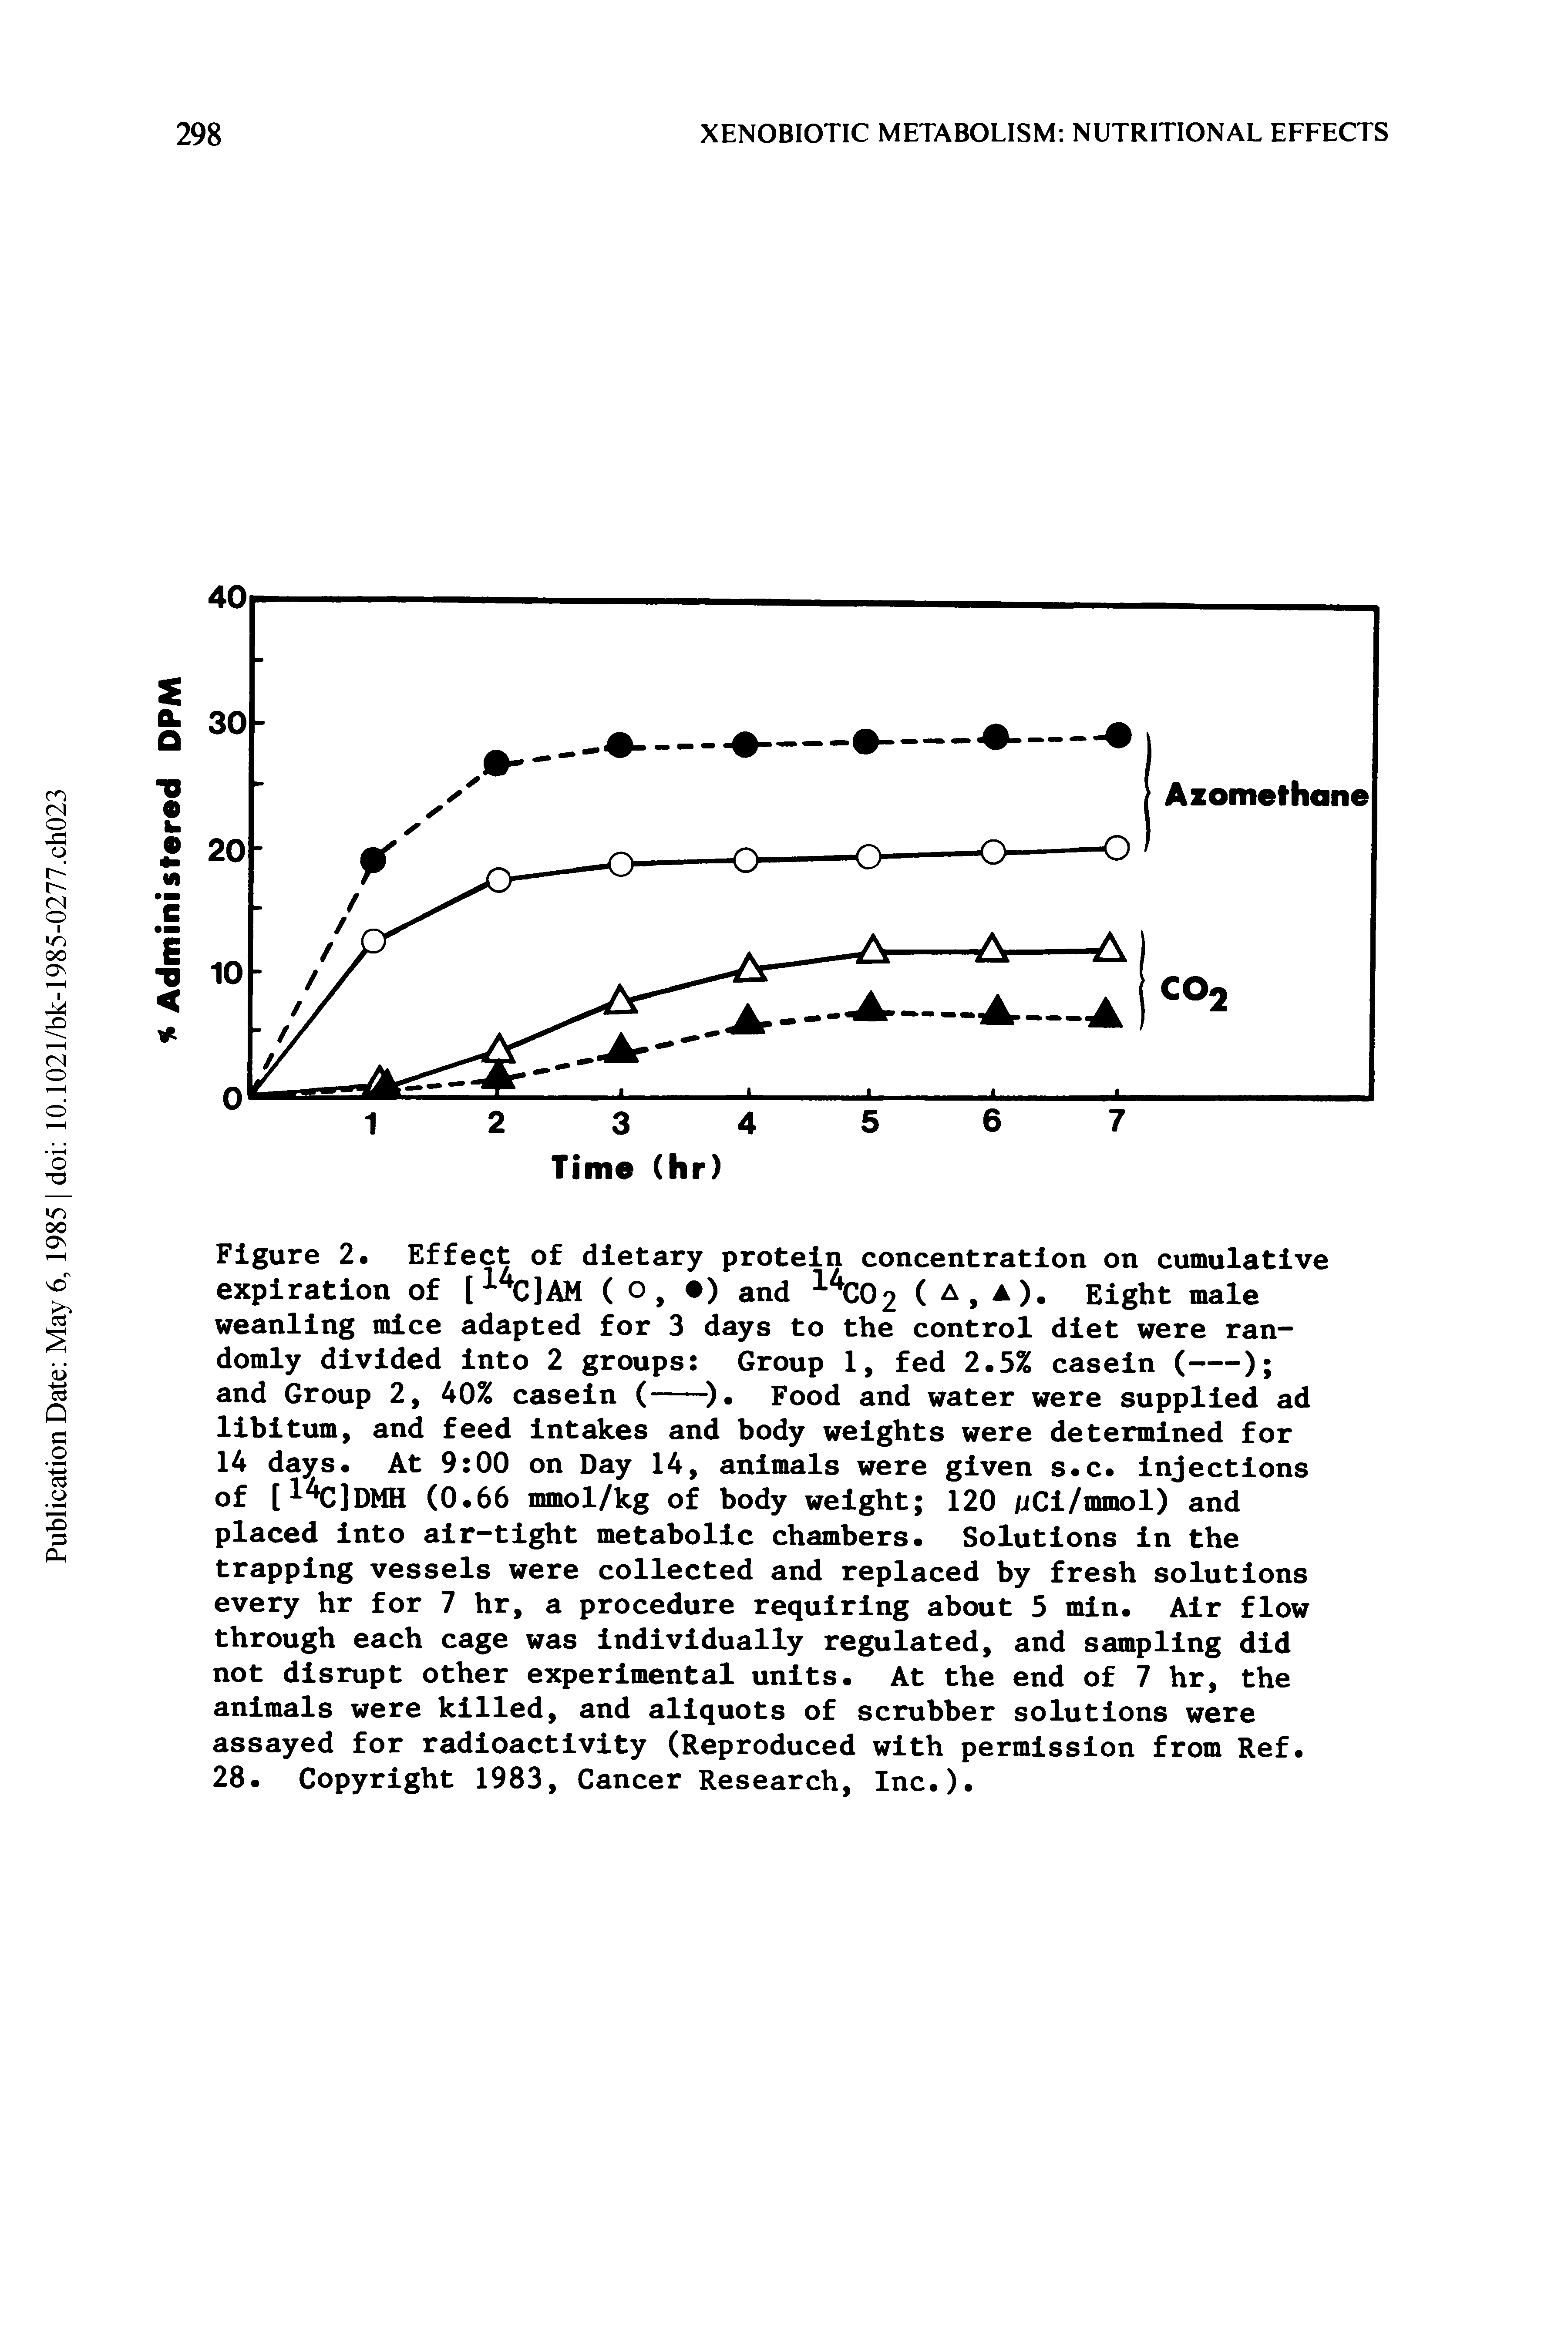 Figure 2. Effect of dietary protein concentration on cumulative expiration of [14C]AM ( o, ) and 1X02 ( a, a). Eight male weanling mice adapted for 3 days to the control diet were randomly divided into 2 groups Group 1, fed 2.5% casein (----) ...